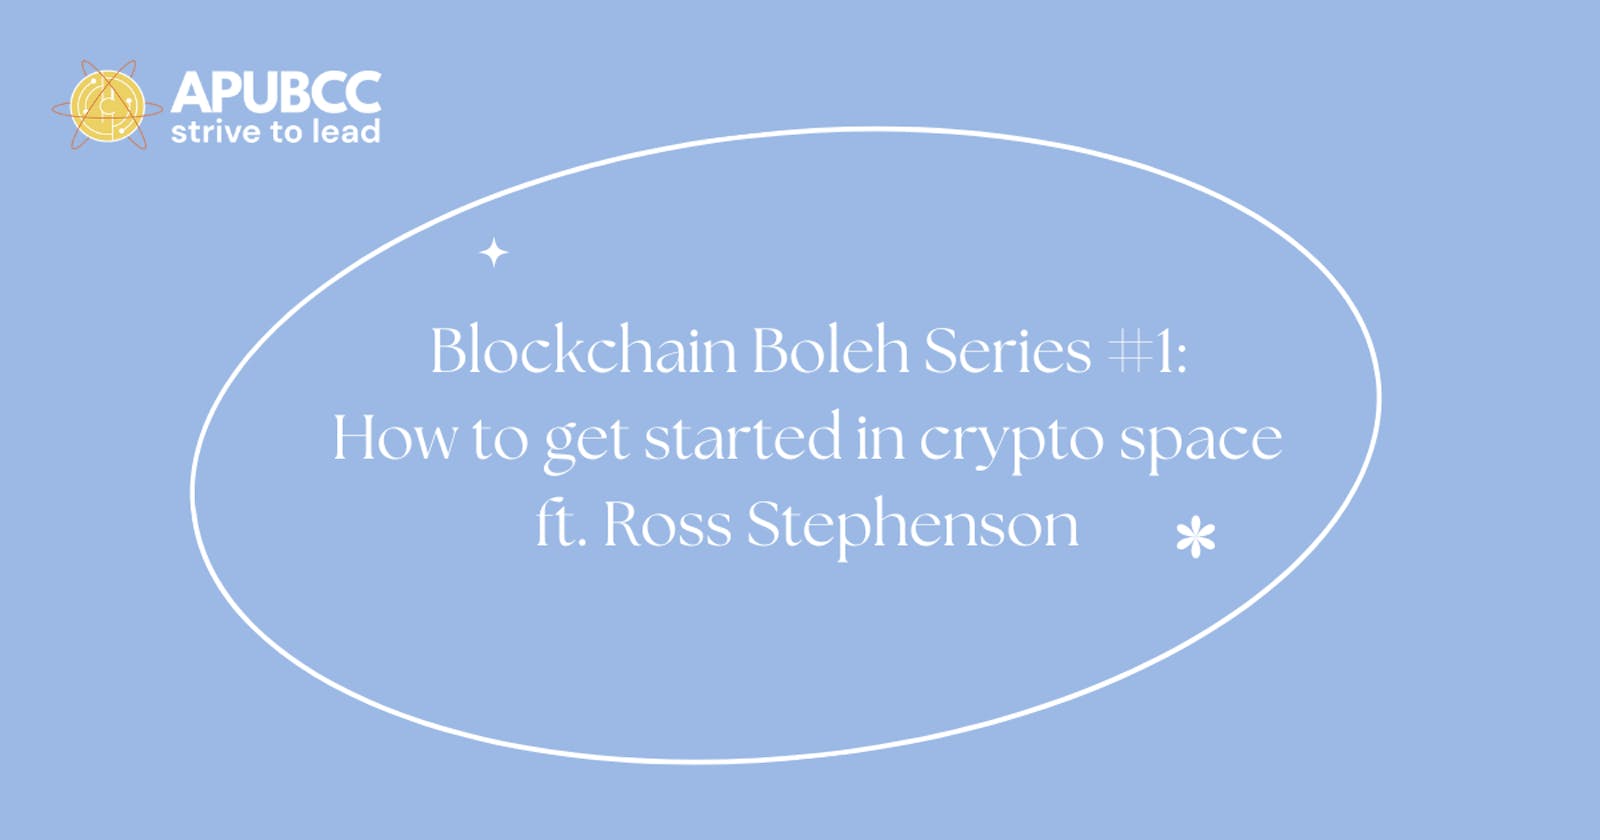 Blockchain Boleh Series #1: How to get started in crypto space ft. Ross Stephenson